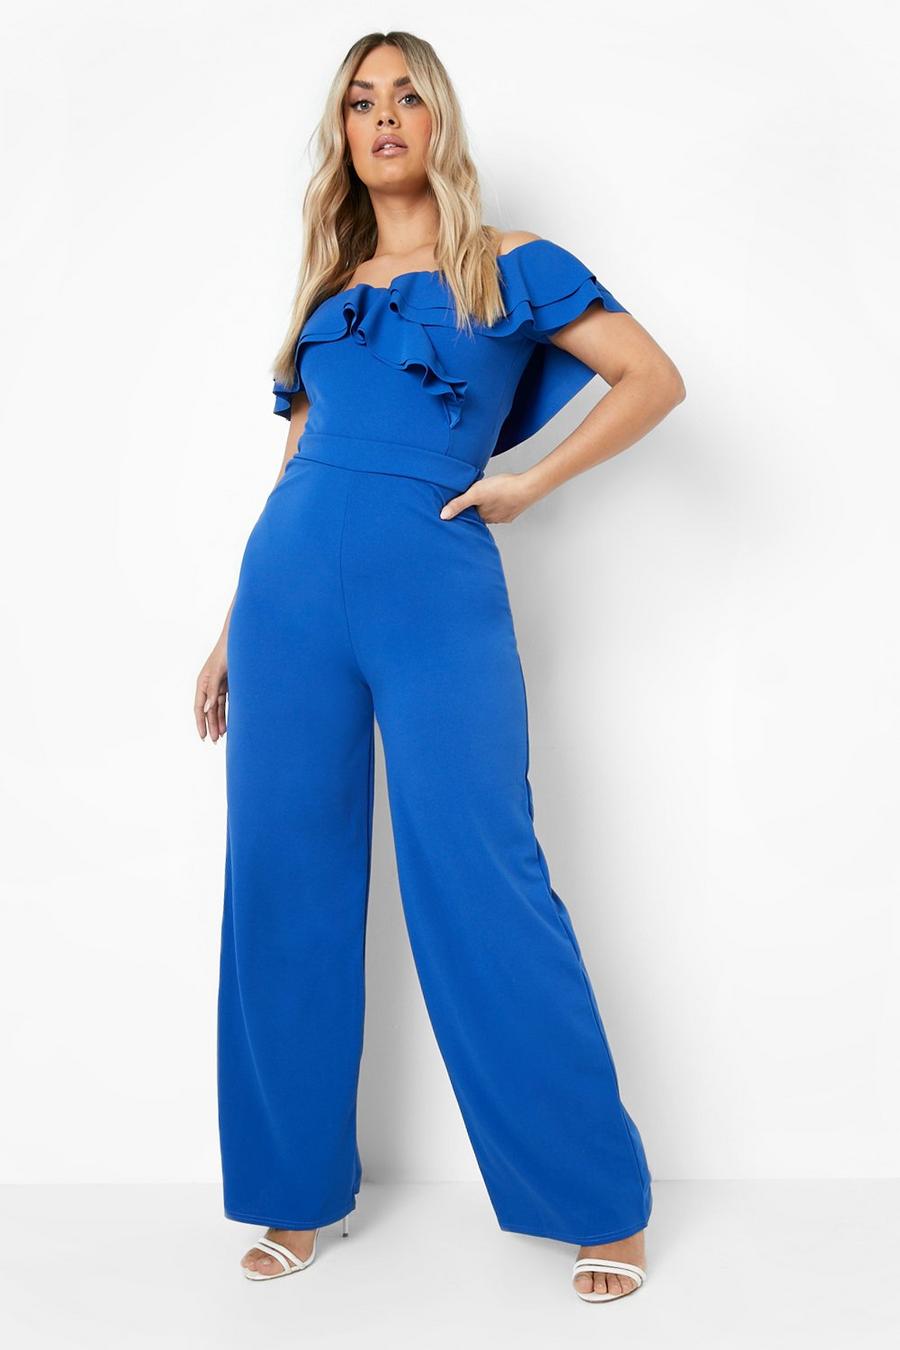 Blue Plus Ruffle Bodysuit And Pants Two-Piece